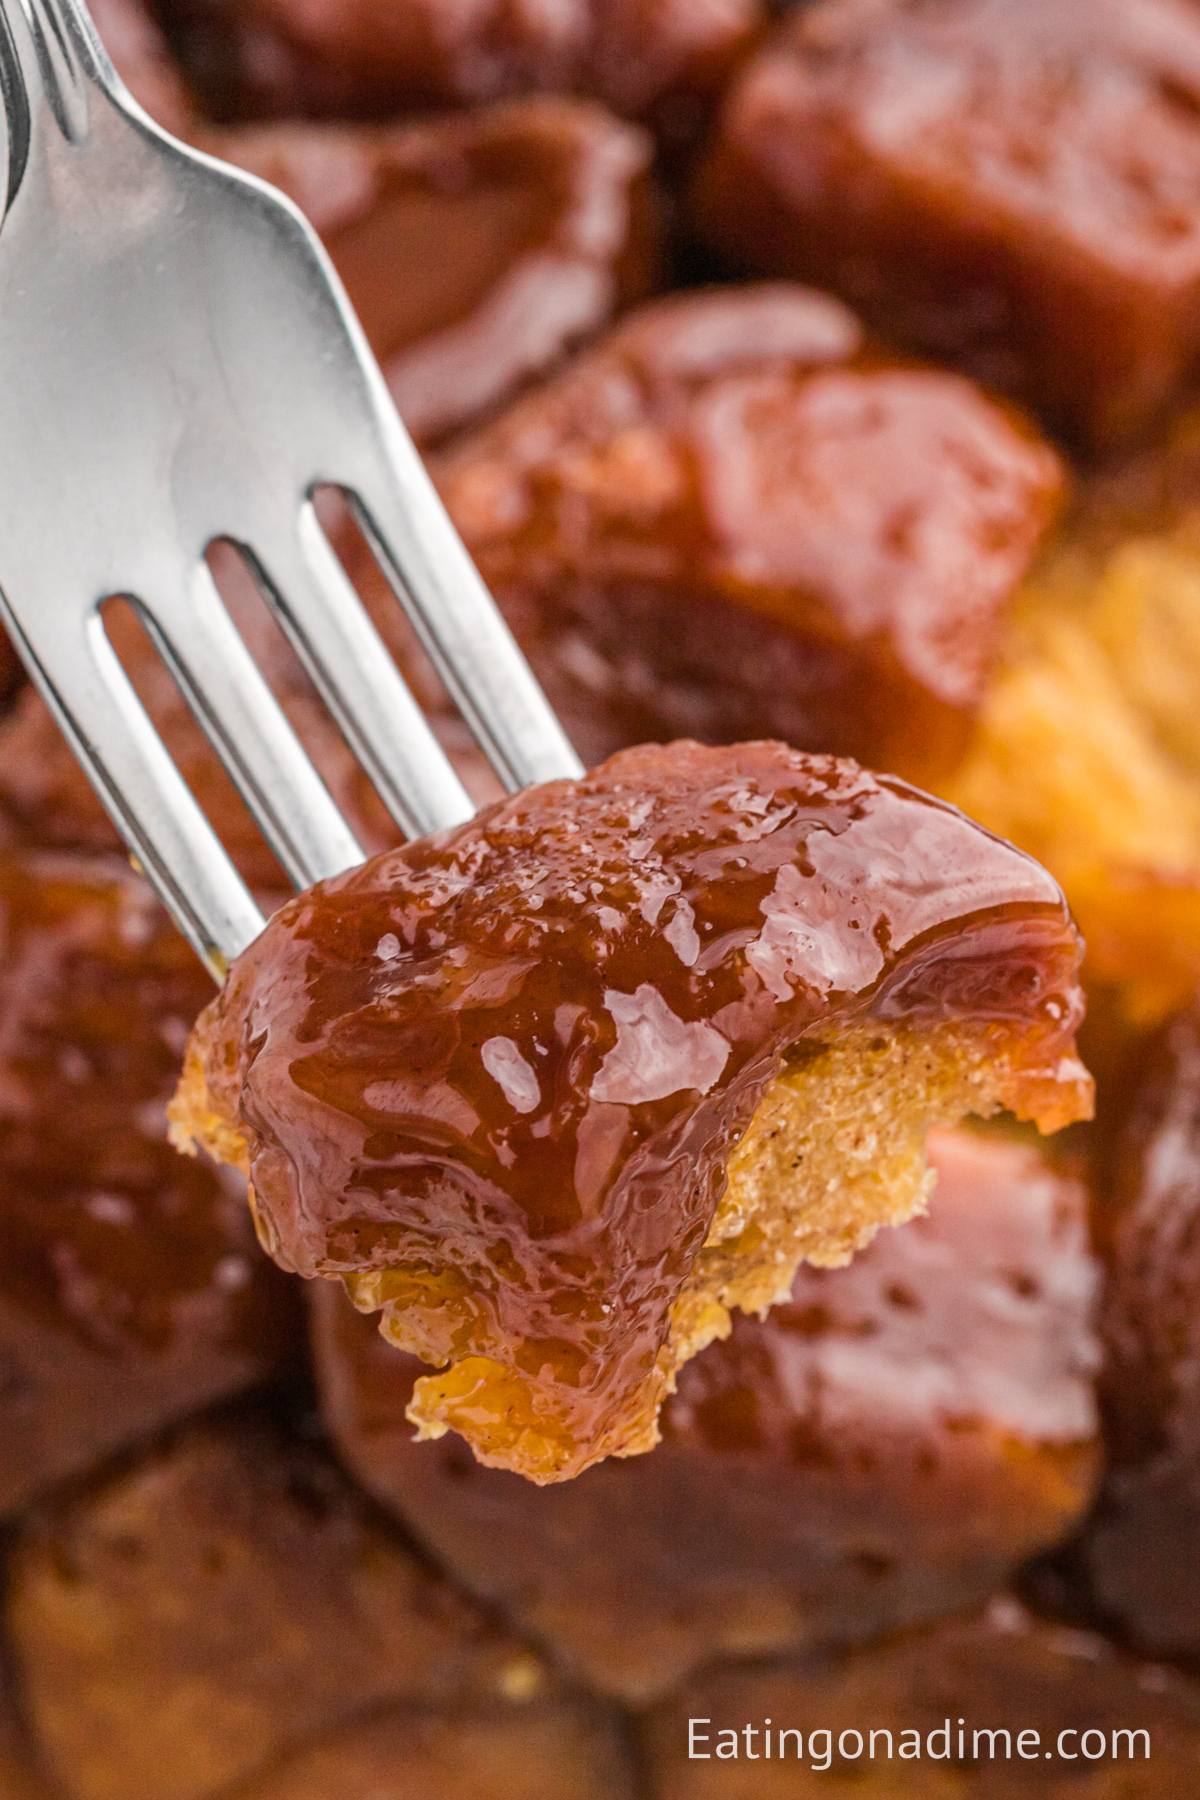 A bite of monkey bread on a fork